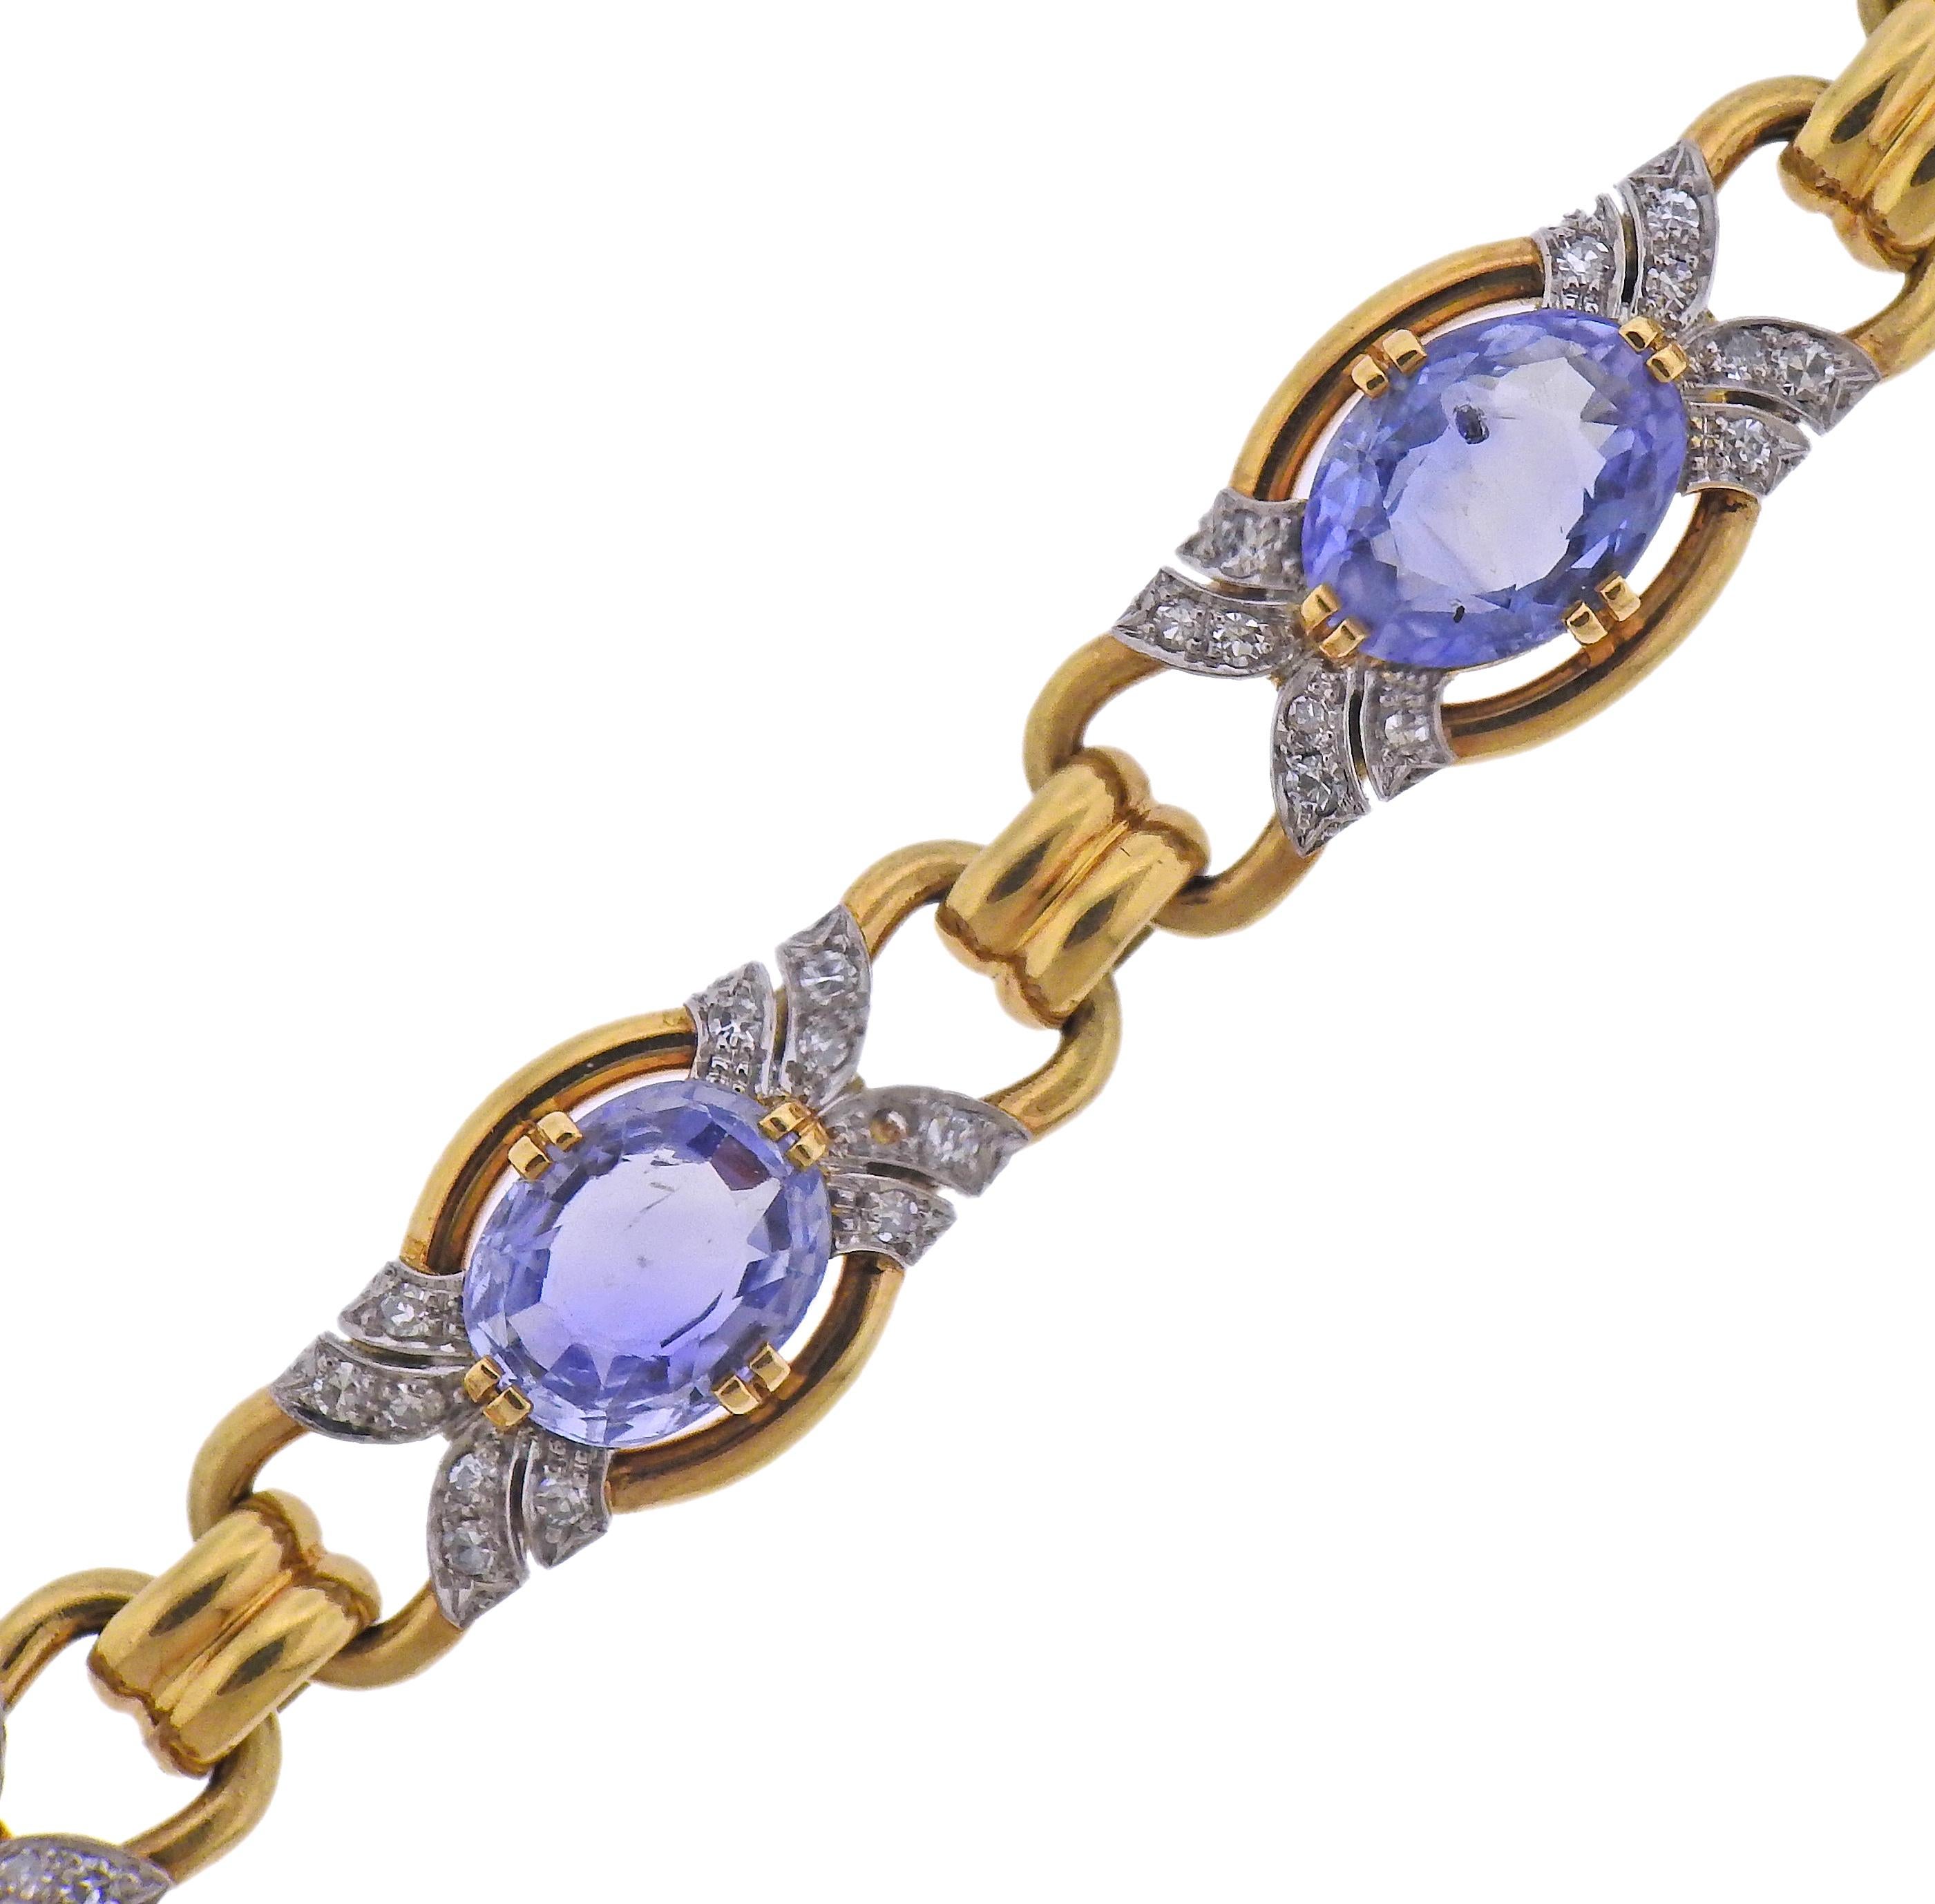 18k gold bracelet, with six oval blue stones - measuring from 10 x 7mm to 11.5 x 8.5mm, surrounded with approx. 0.80ctw in diamonds Bracelet is 7 1/8